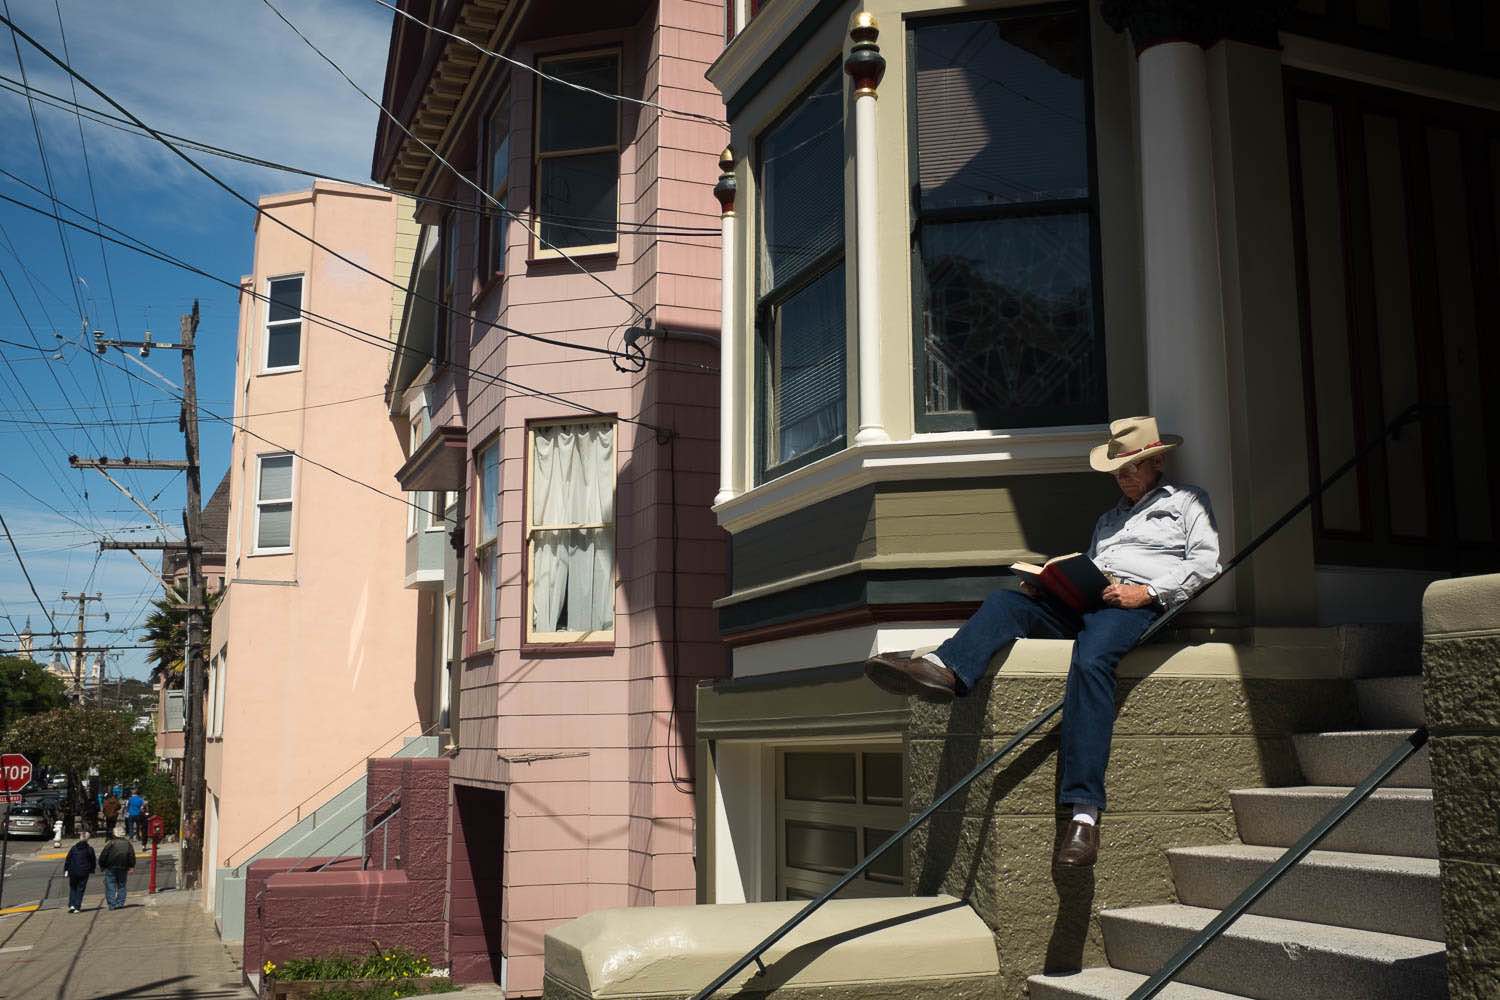 A man in a cowboy hat reading a book on his front steps in San Francisco